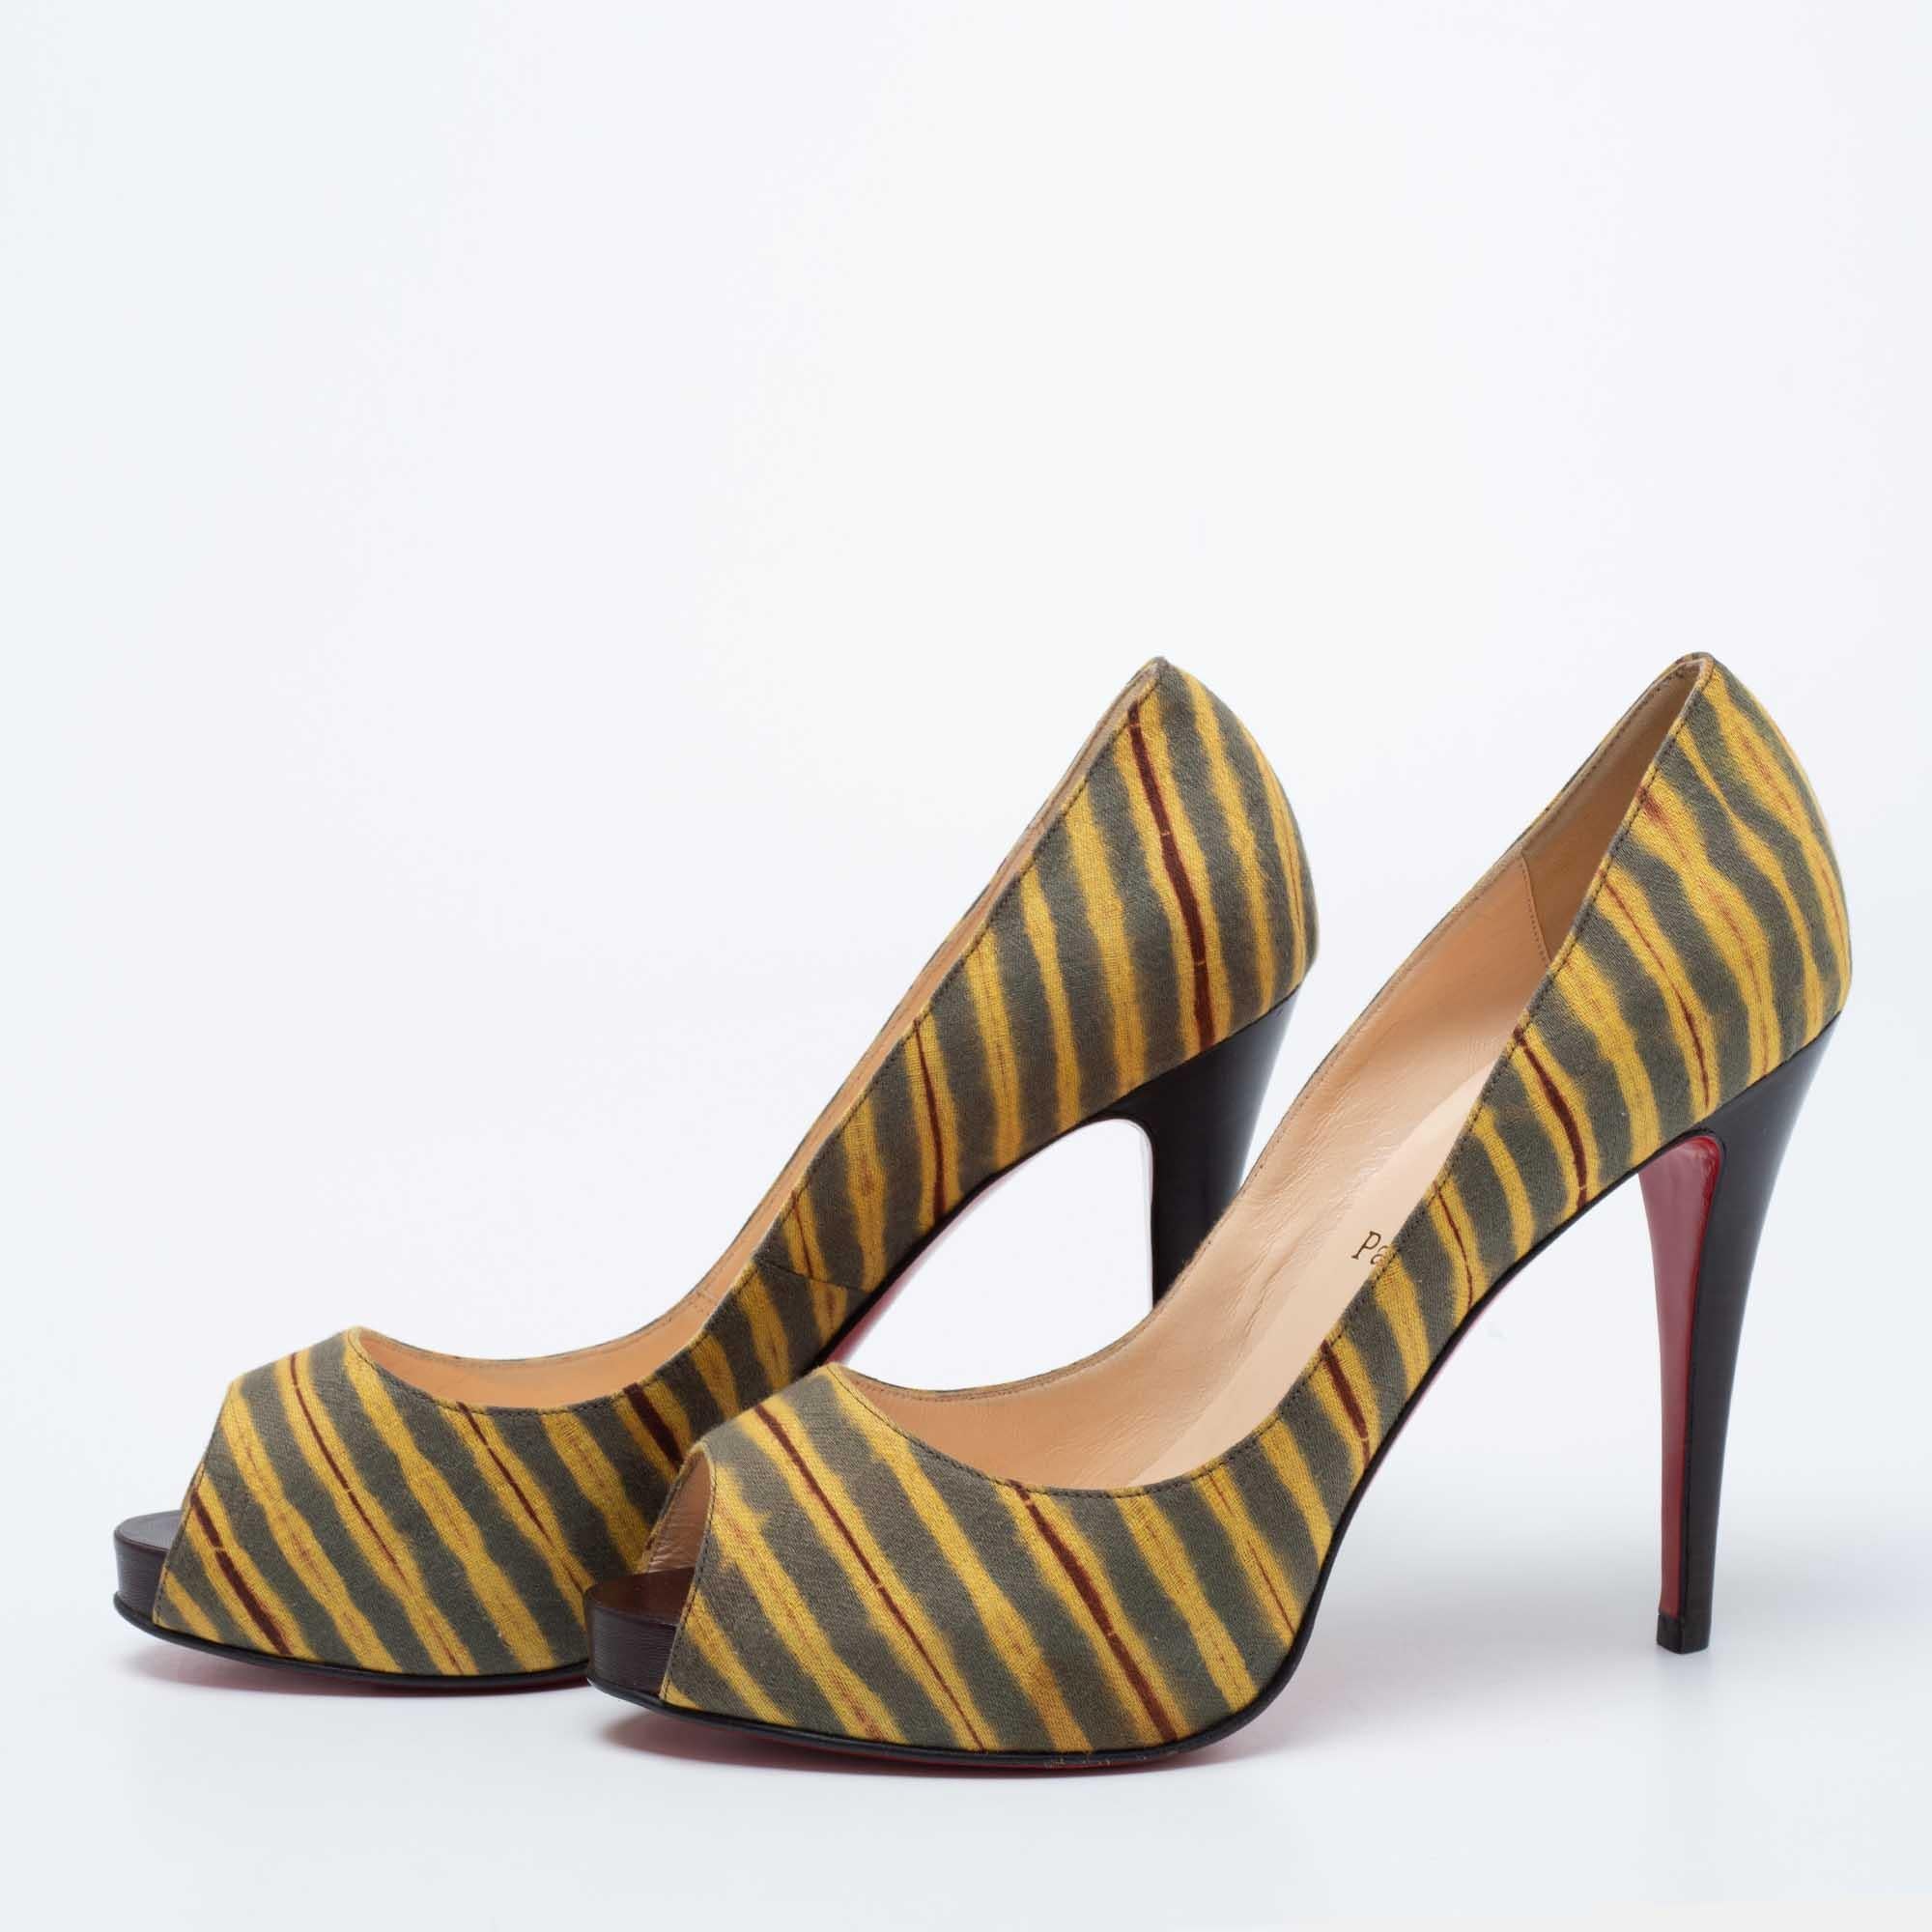 Christian Louboutin Tri-Color Printed Canvas Very Prive Peep-Toe Pumps Size 41 For Sale 3